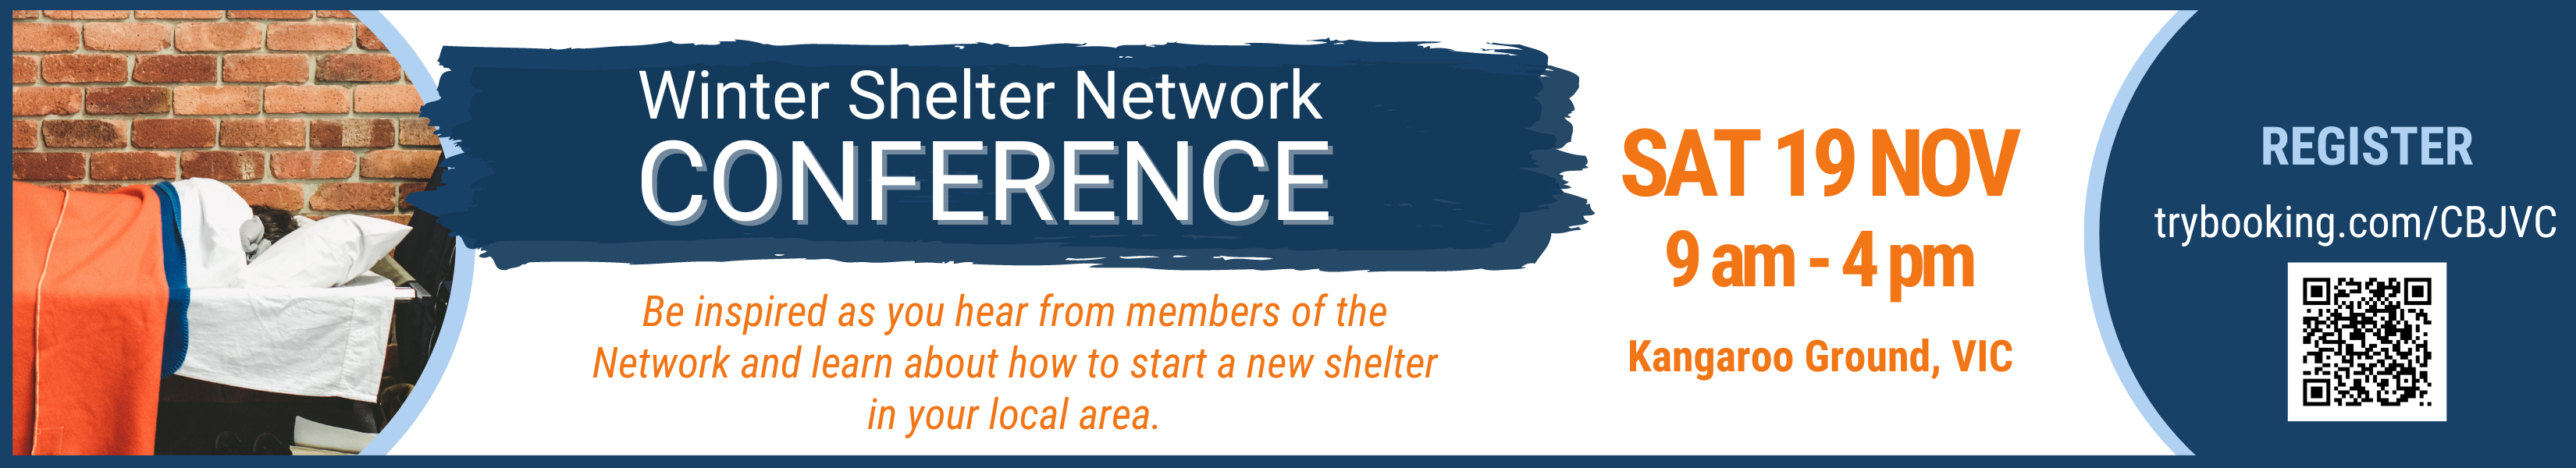 Winter Shelter Network Conference (6)